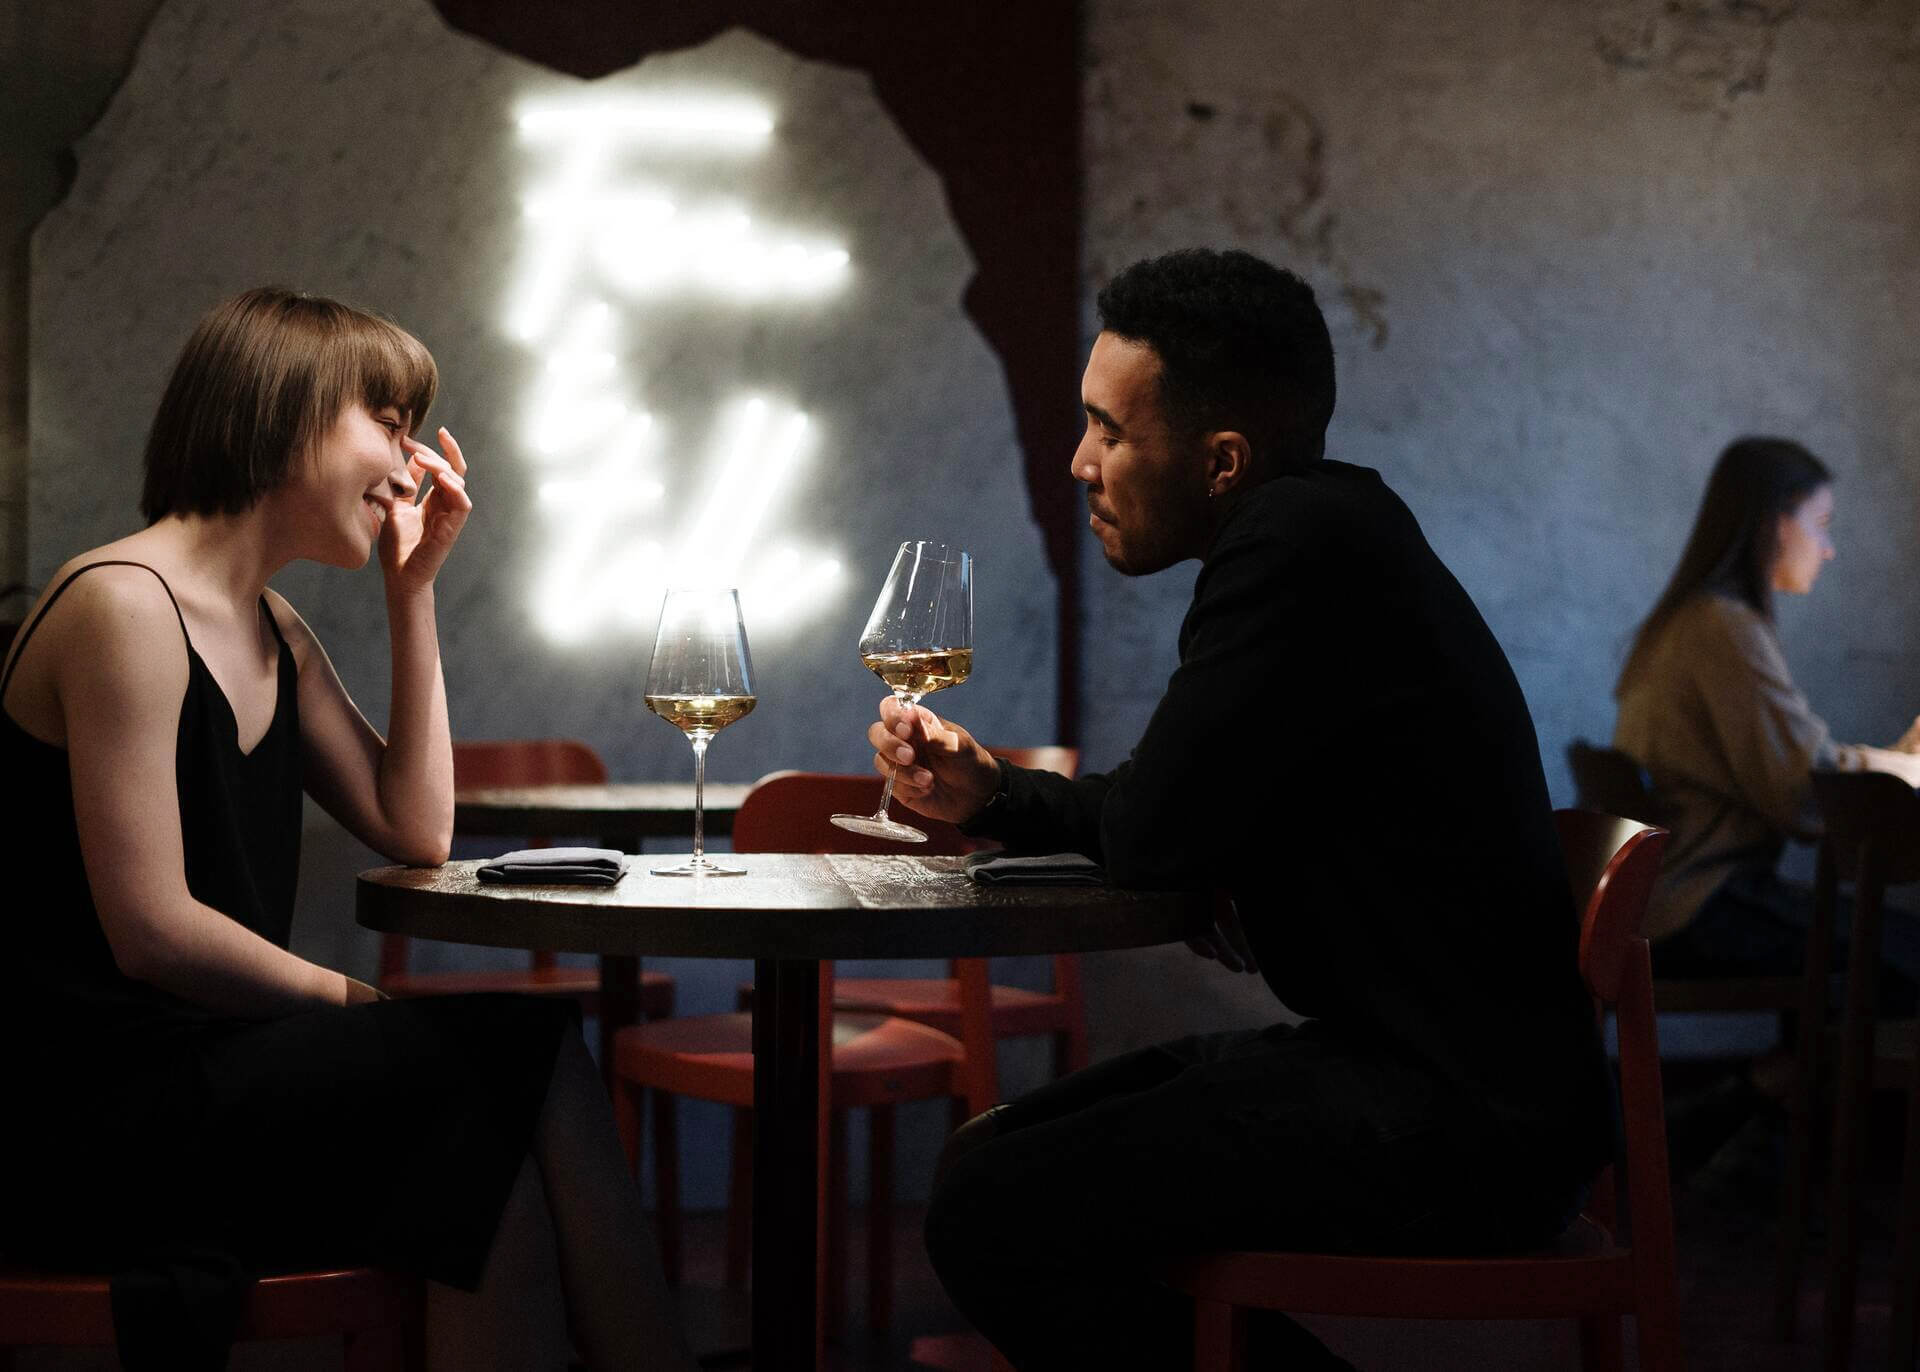 couple on a date in a restaurant